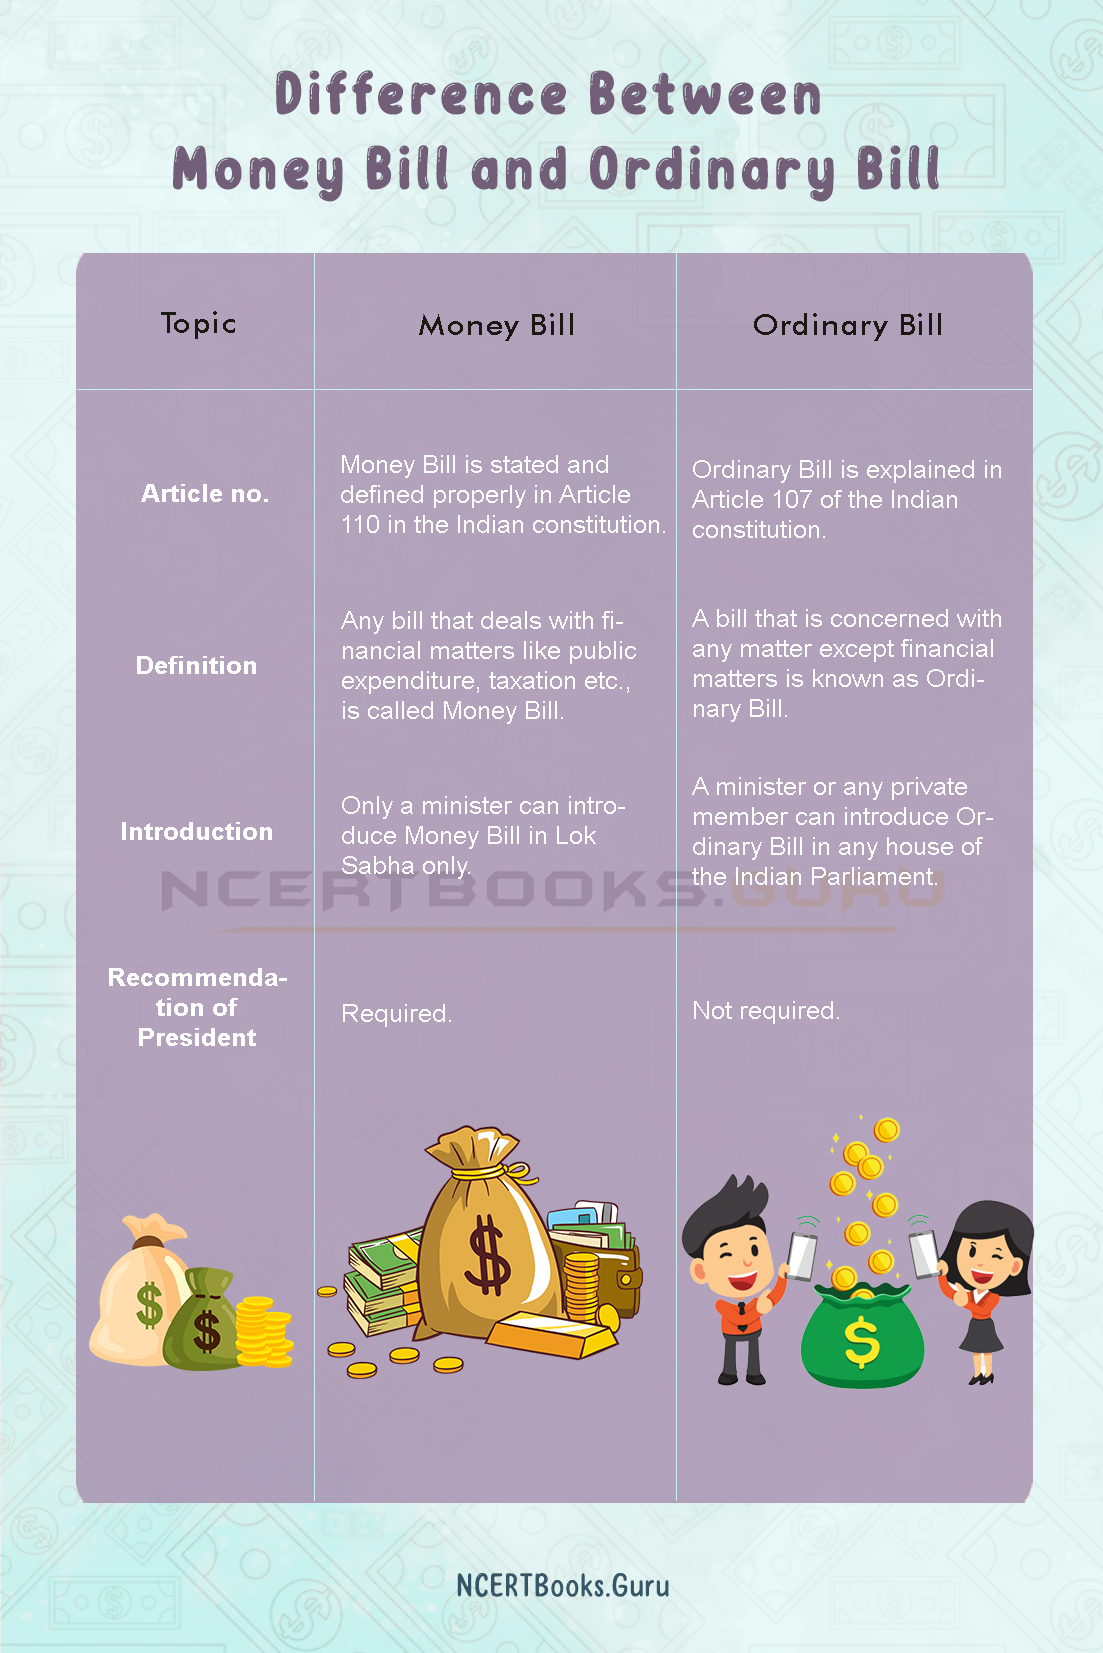 Difference Between Money Bill and Ordinary Bill 2